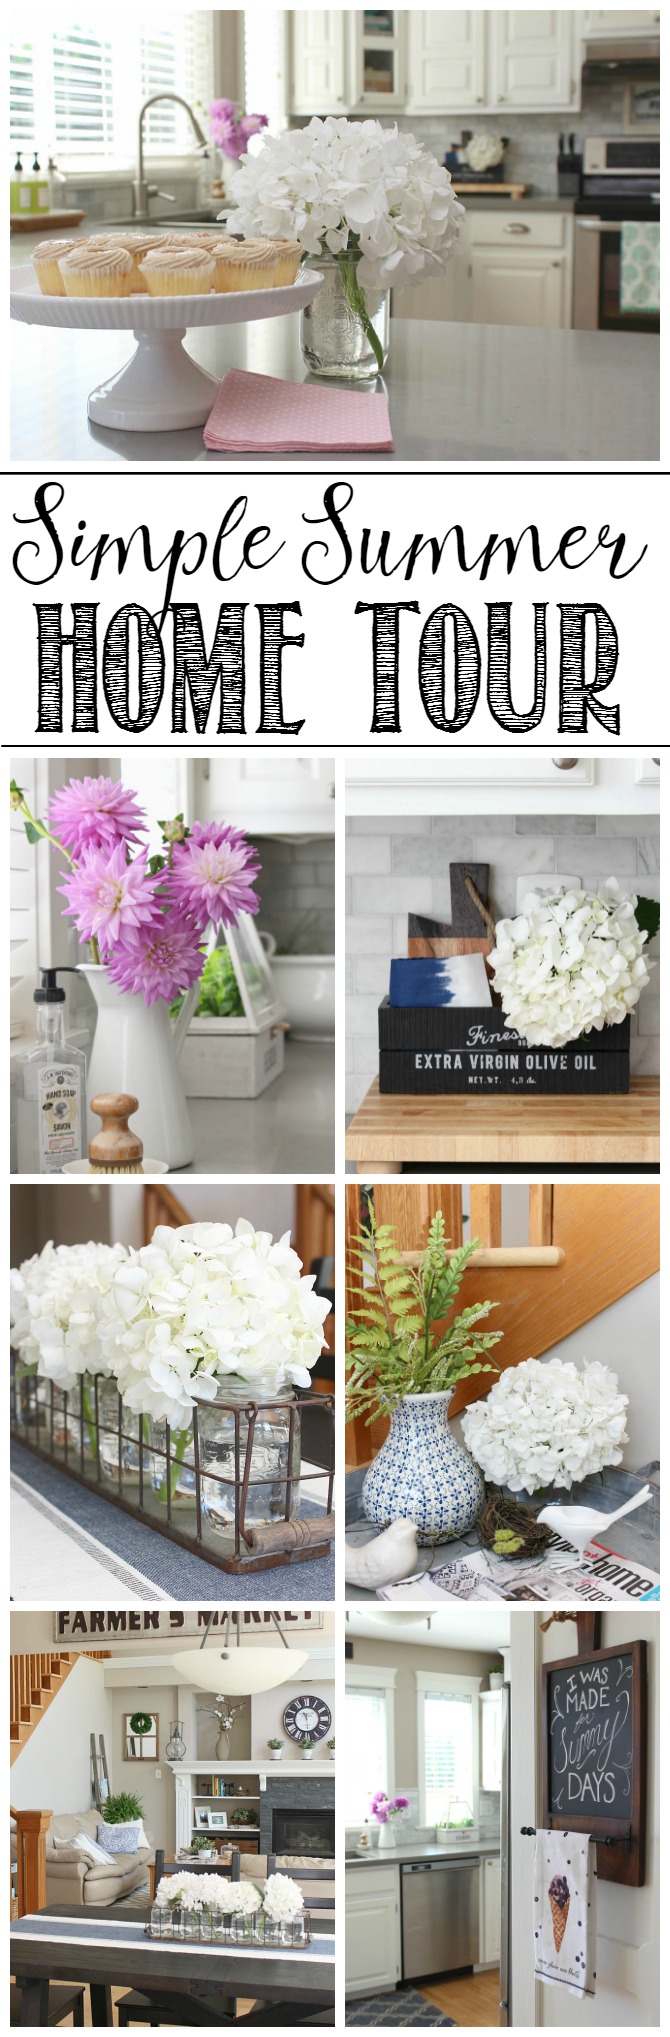 Beautiful simple summer home tour and summer decor ideas.